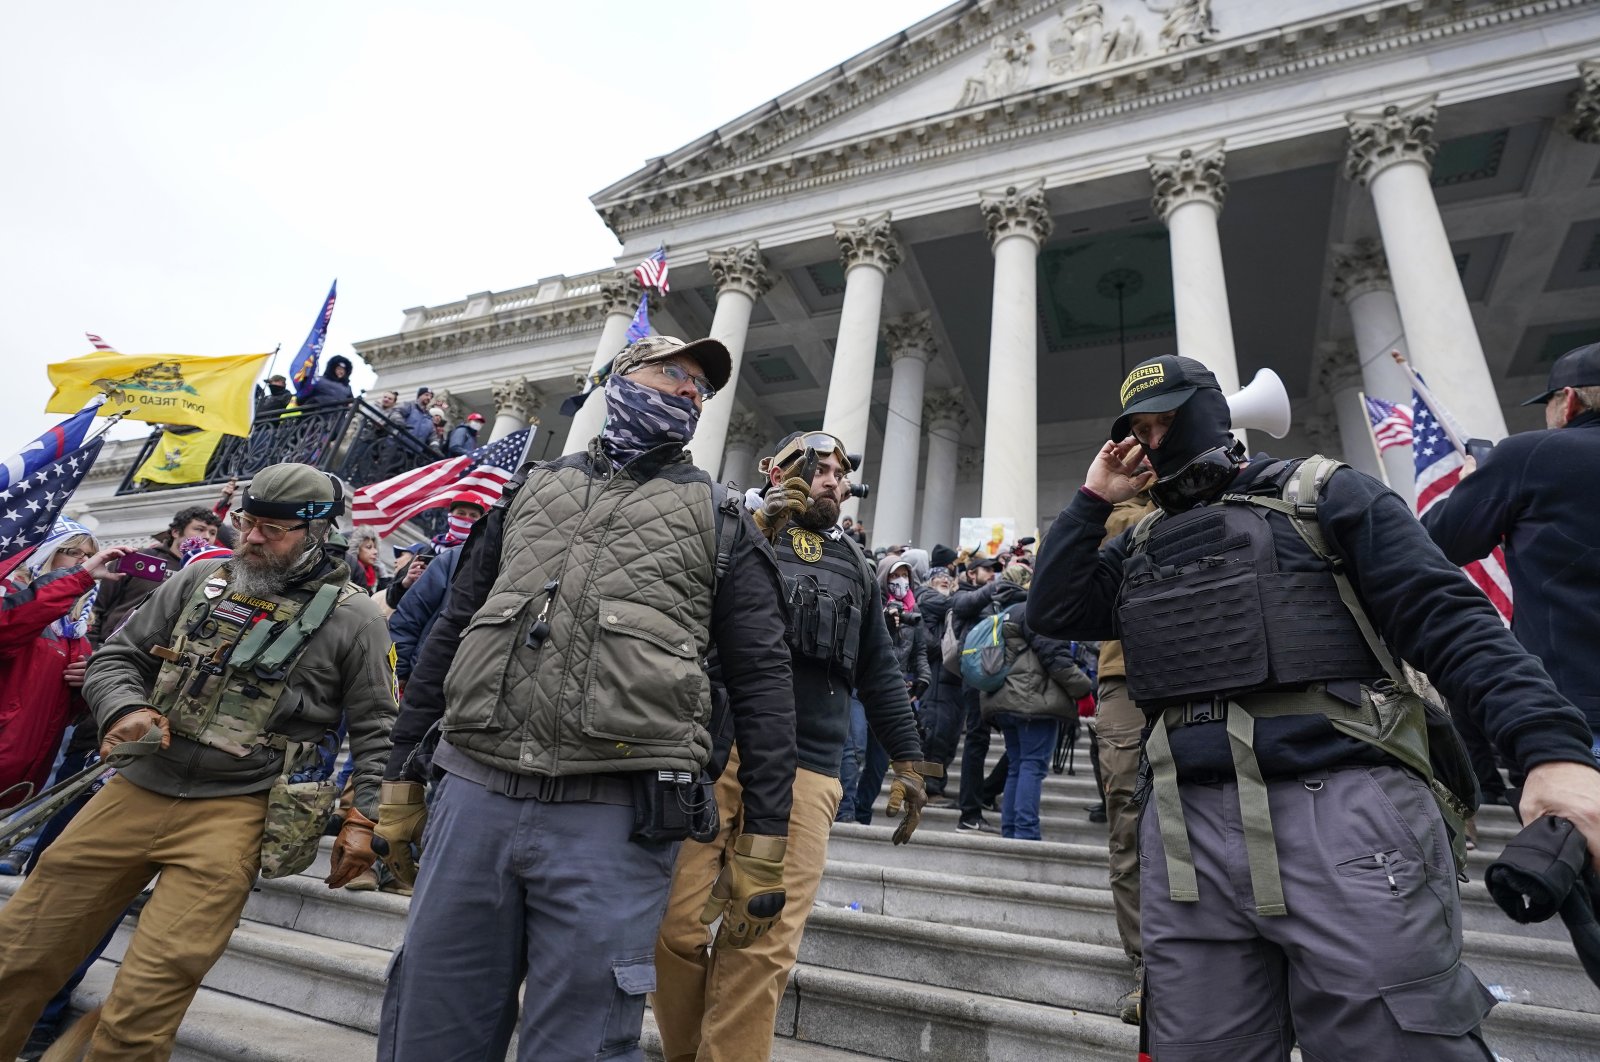 Members of the Oath Keepers on the East Front of the U.S. Capitol, Washington, U.S., Jan. 6, 2021. (AP Photo)